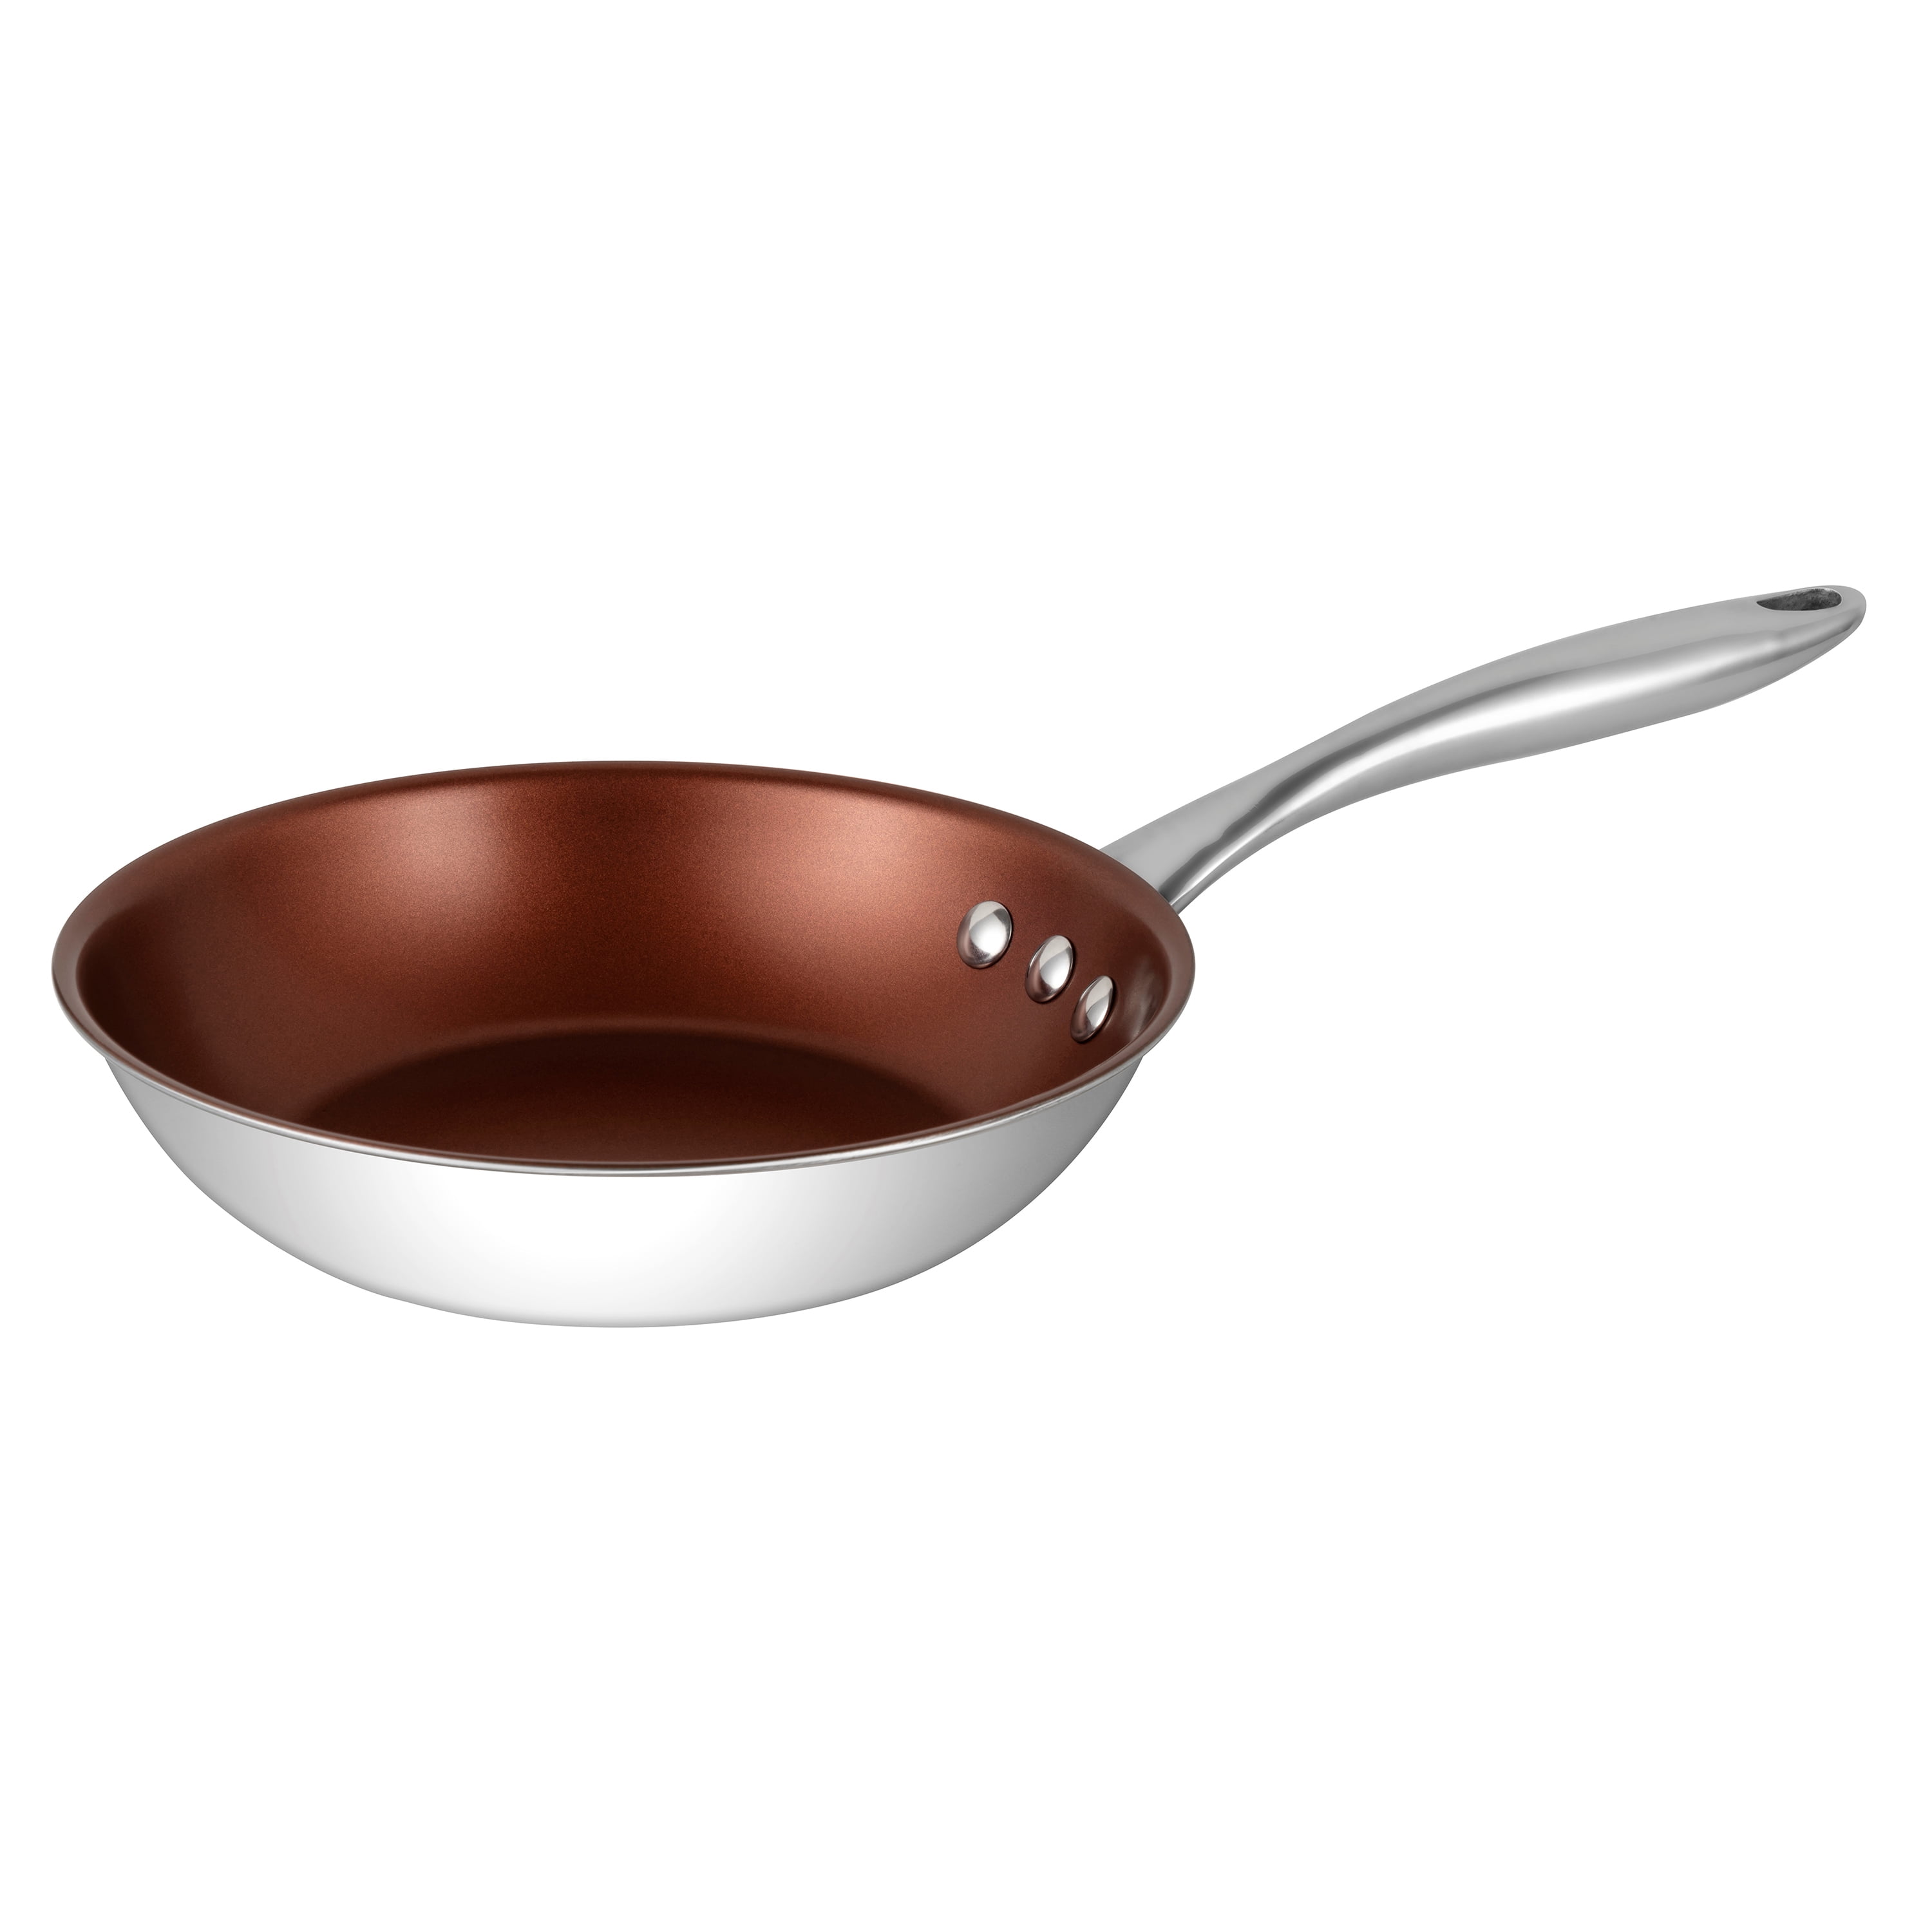 8 Stainless Steel Pan by Ozeri with ETERNA, a 100% PFOA and APEO-Free  Non-Stick Coating 